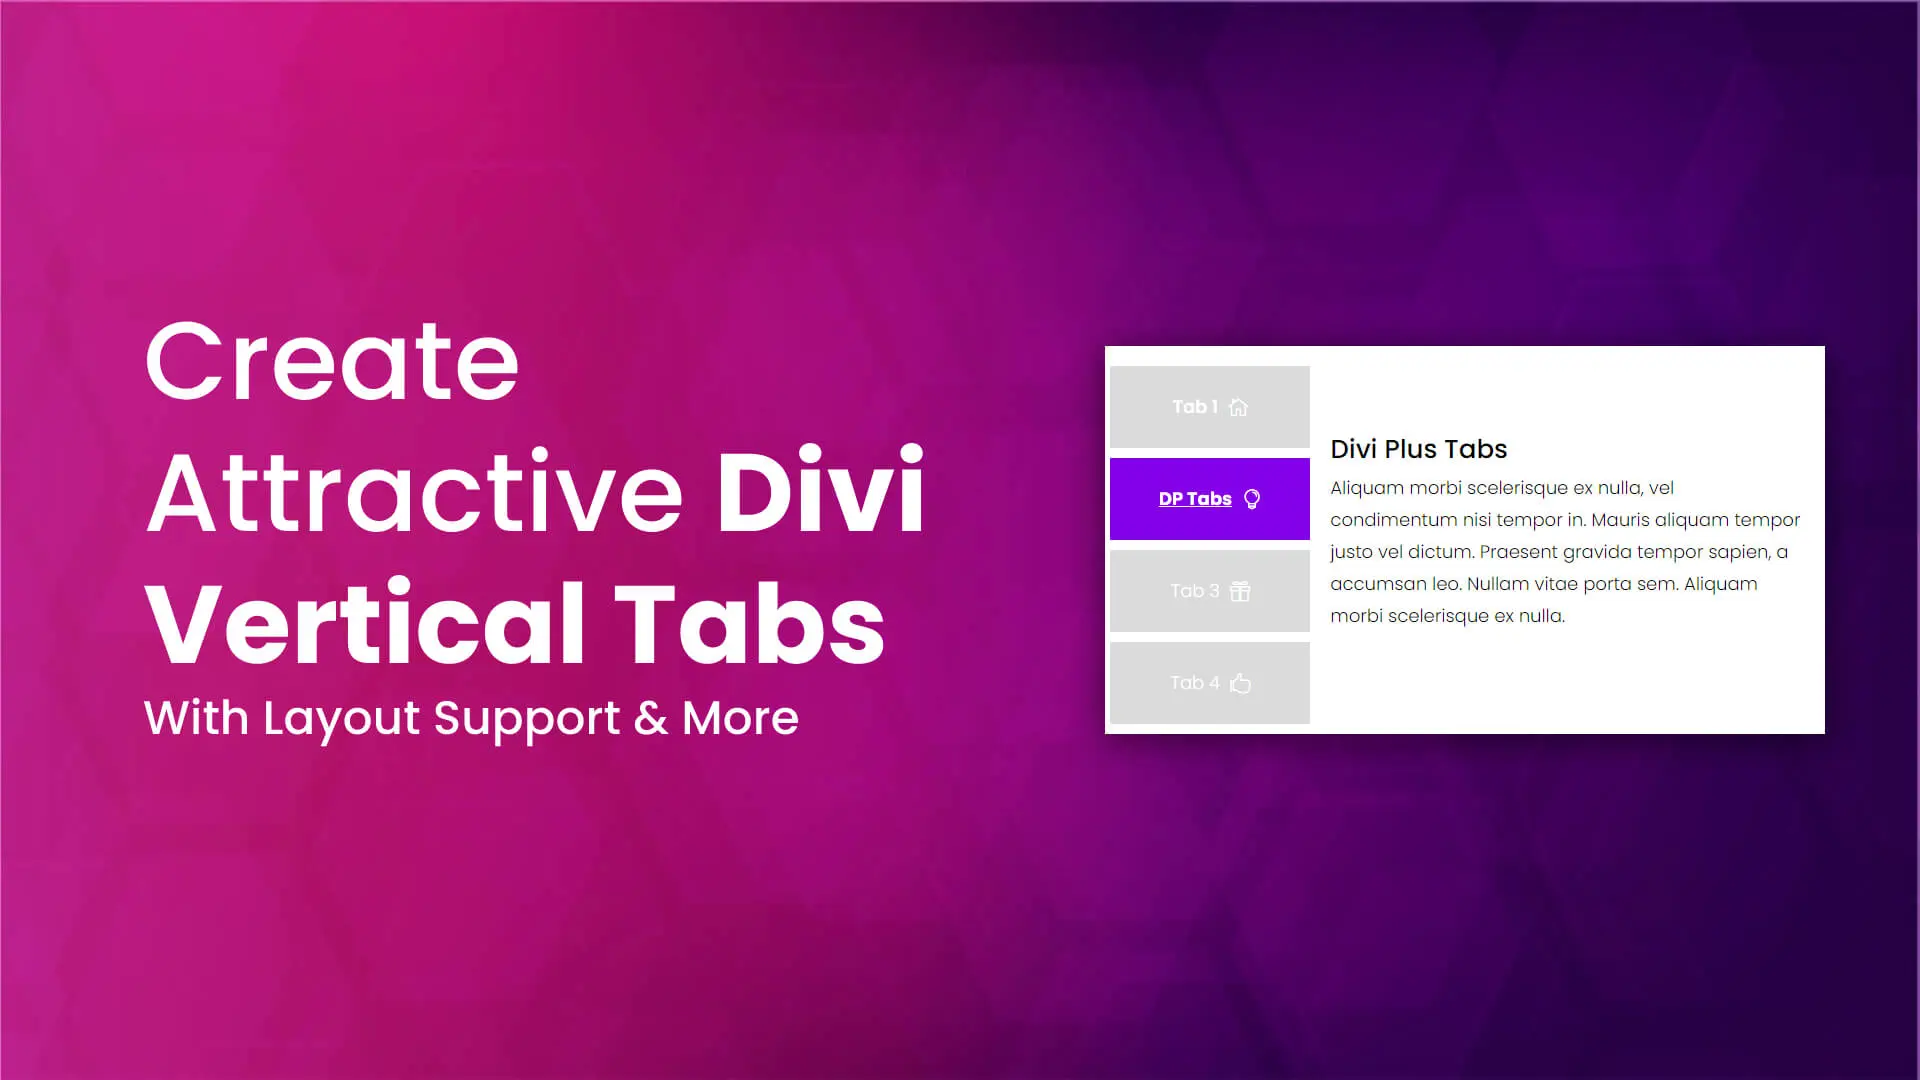 How to create Divi vertical tabs